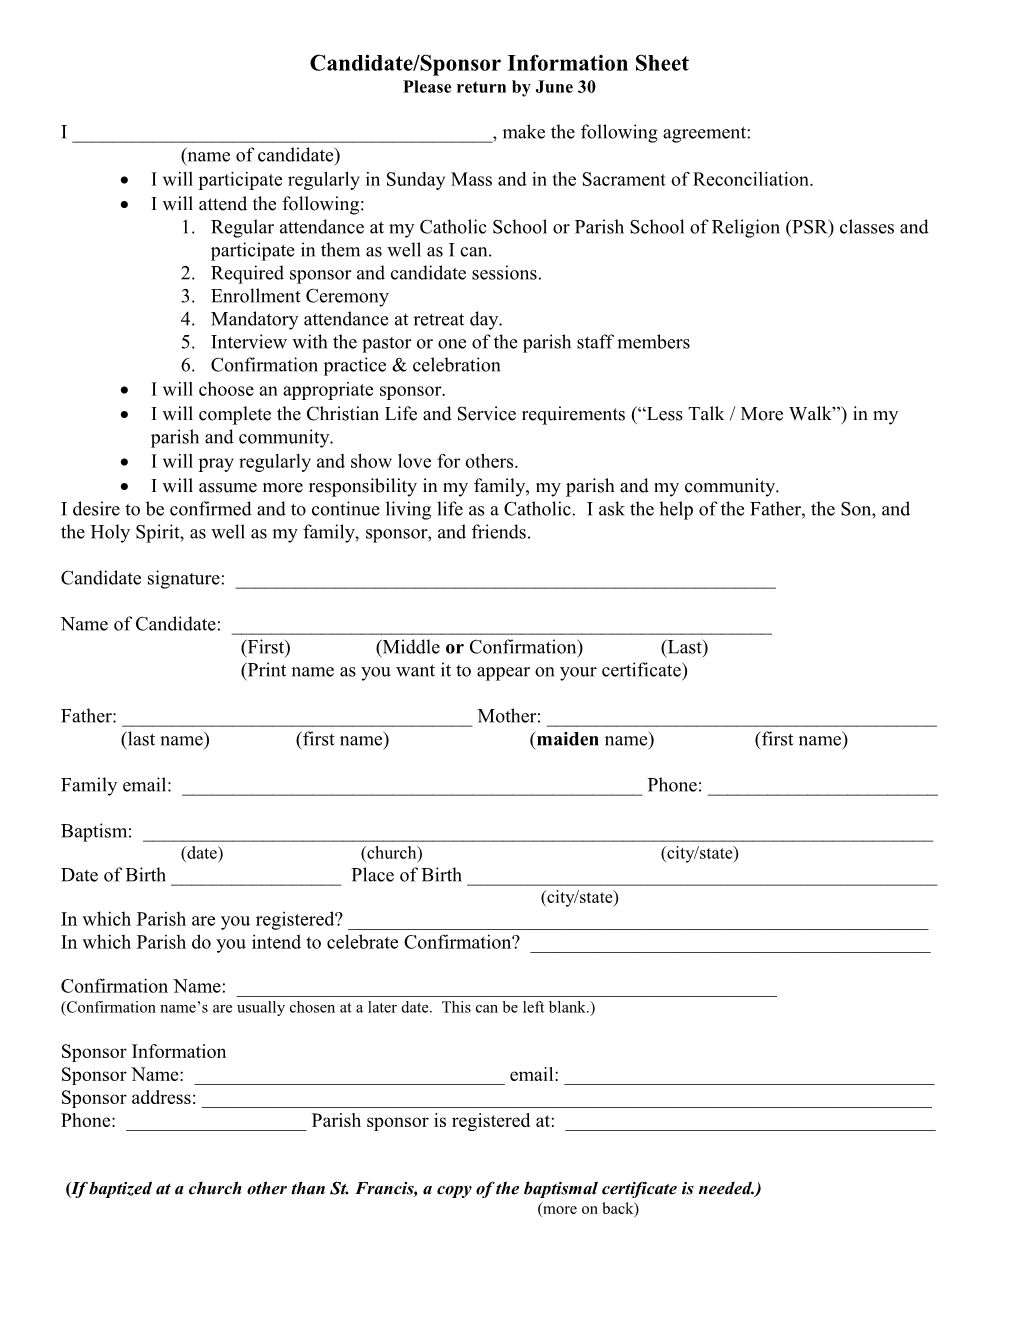 Candidate Contract of Enrollment